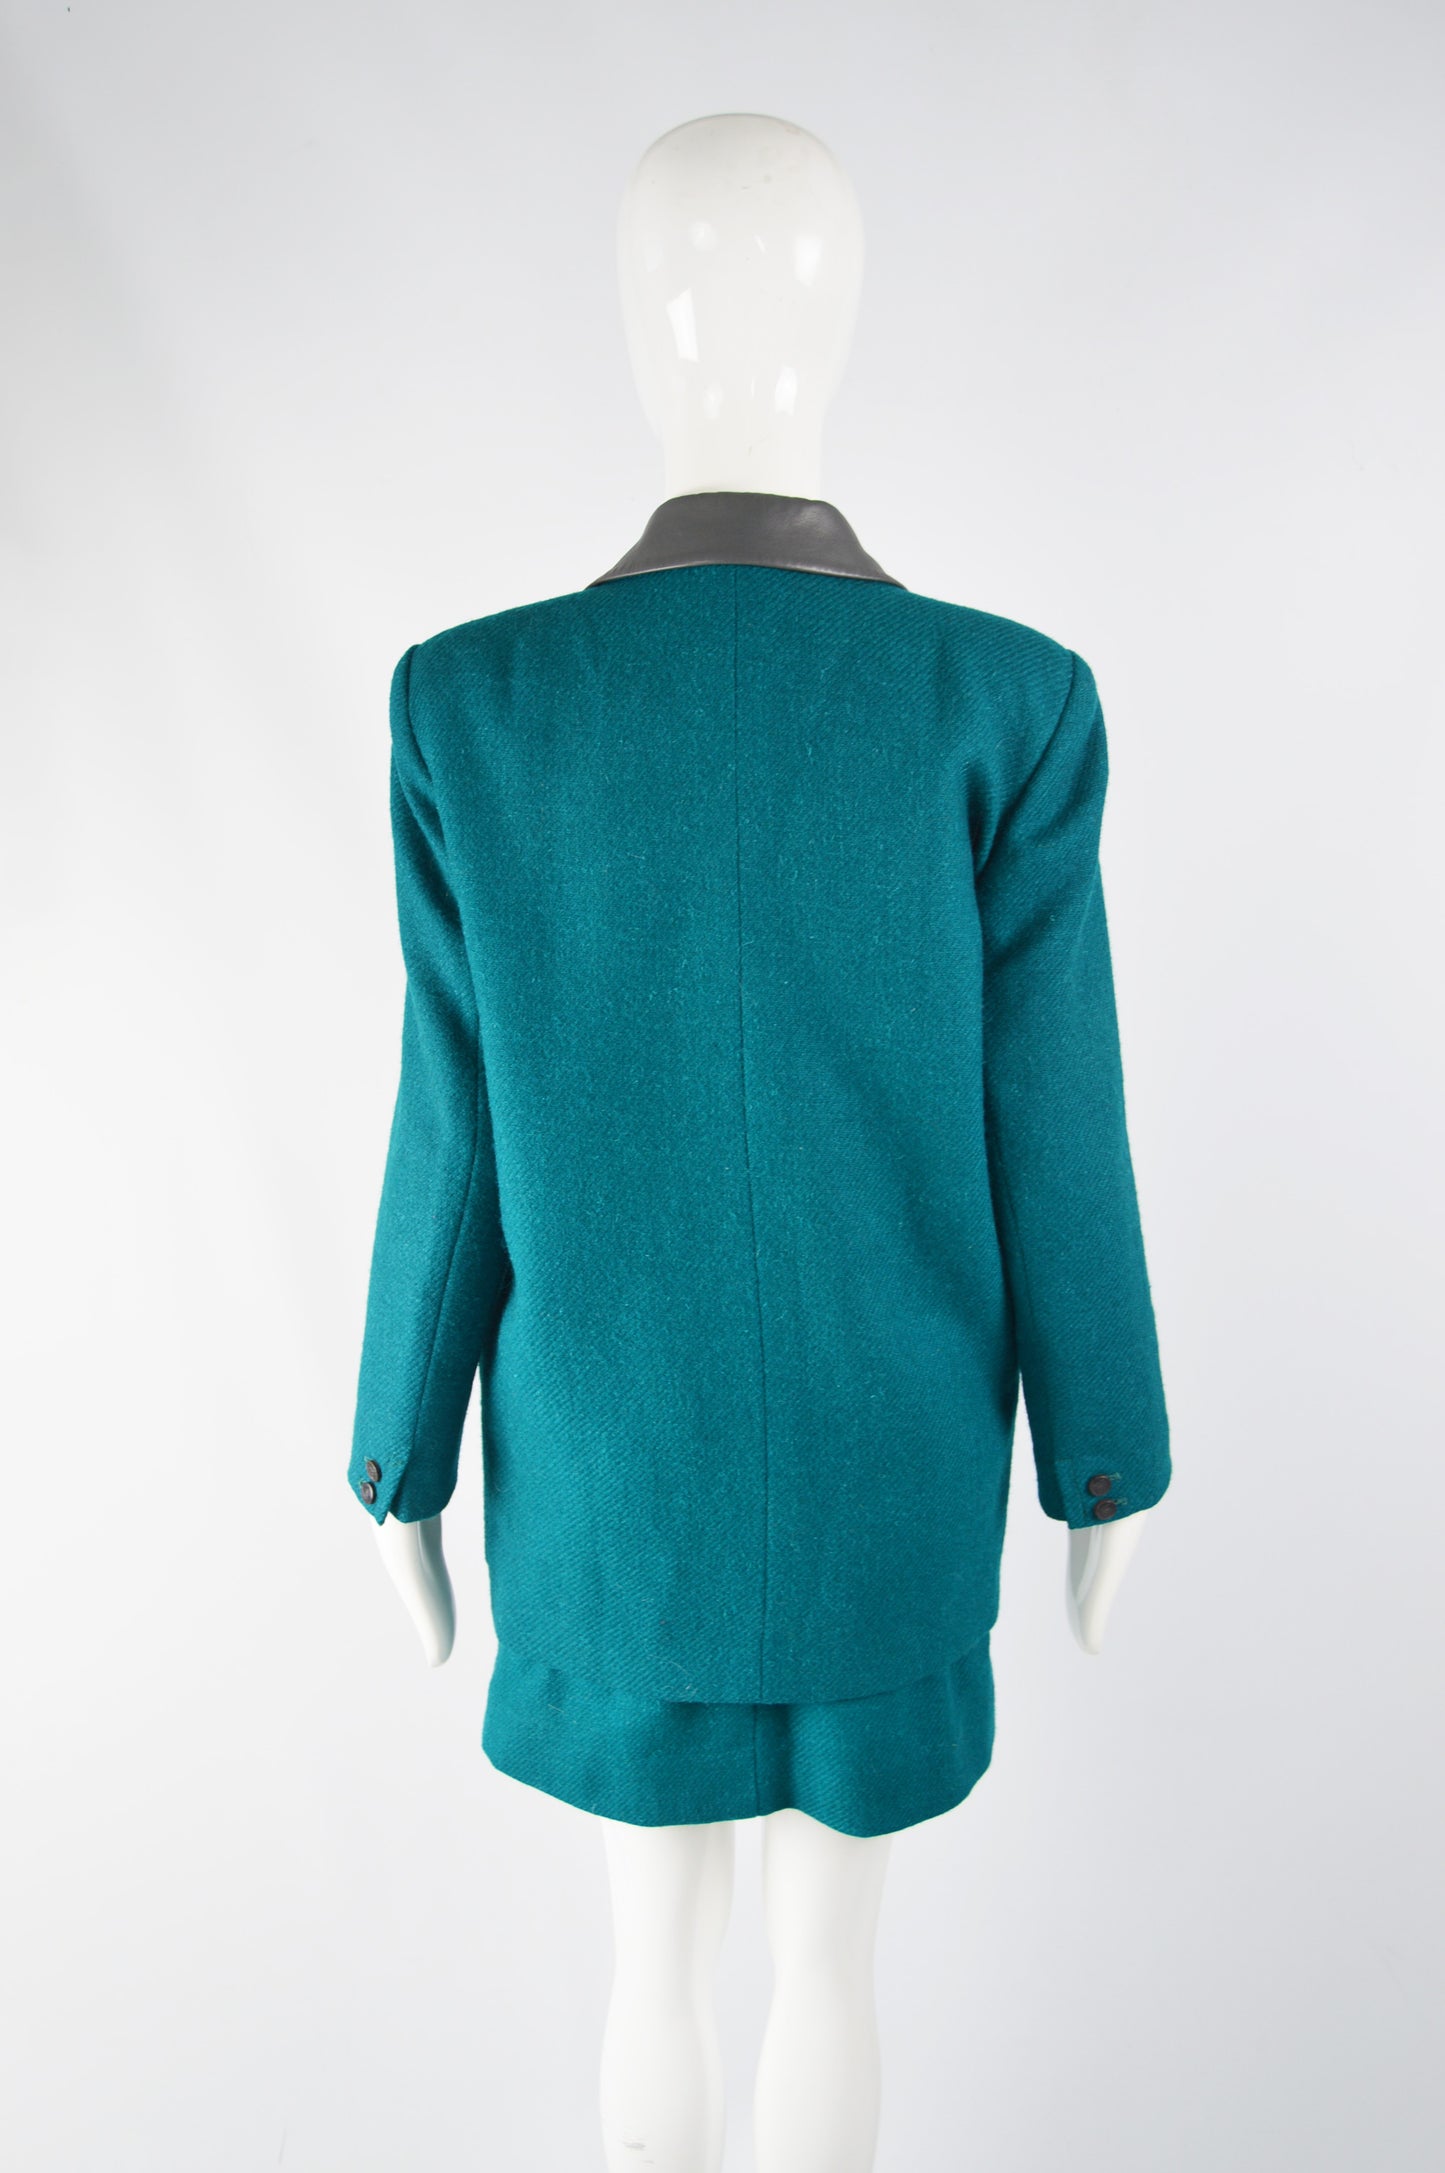 Vintage Womens Teal Wool & Leather Skirt Suit, 1980s